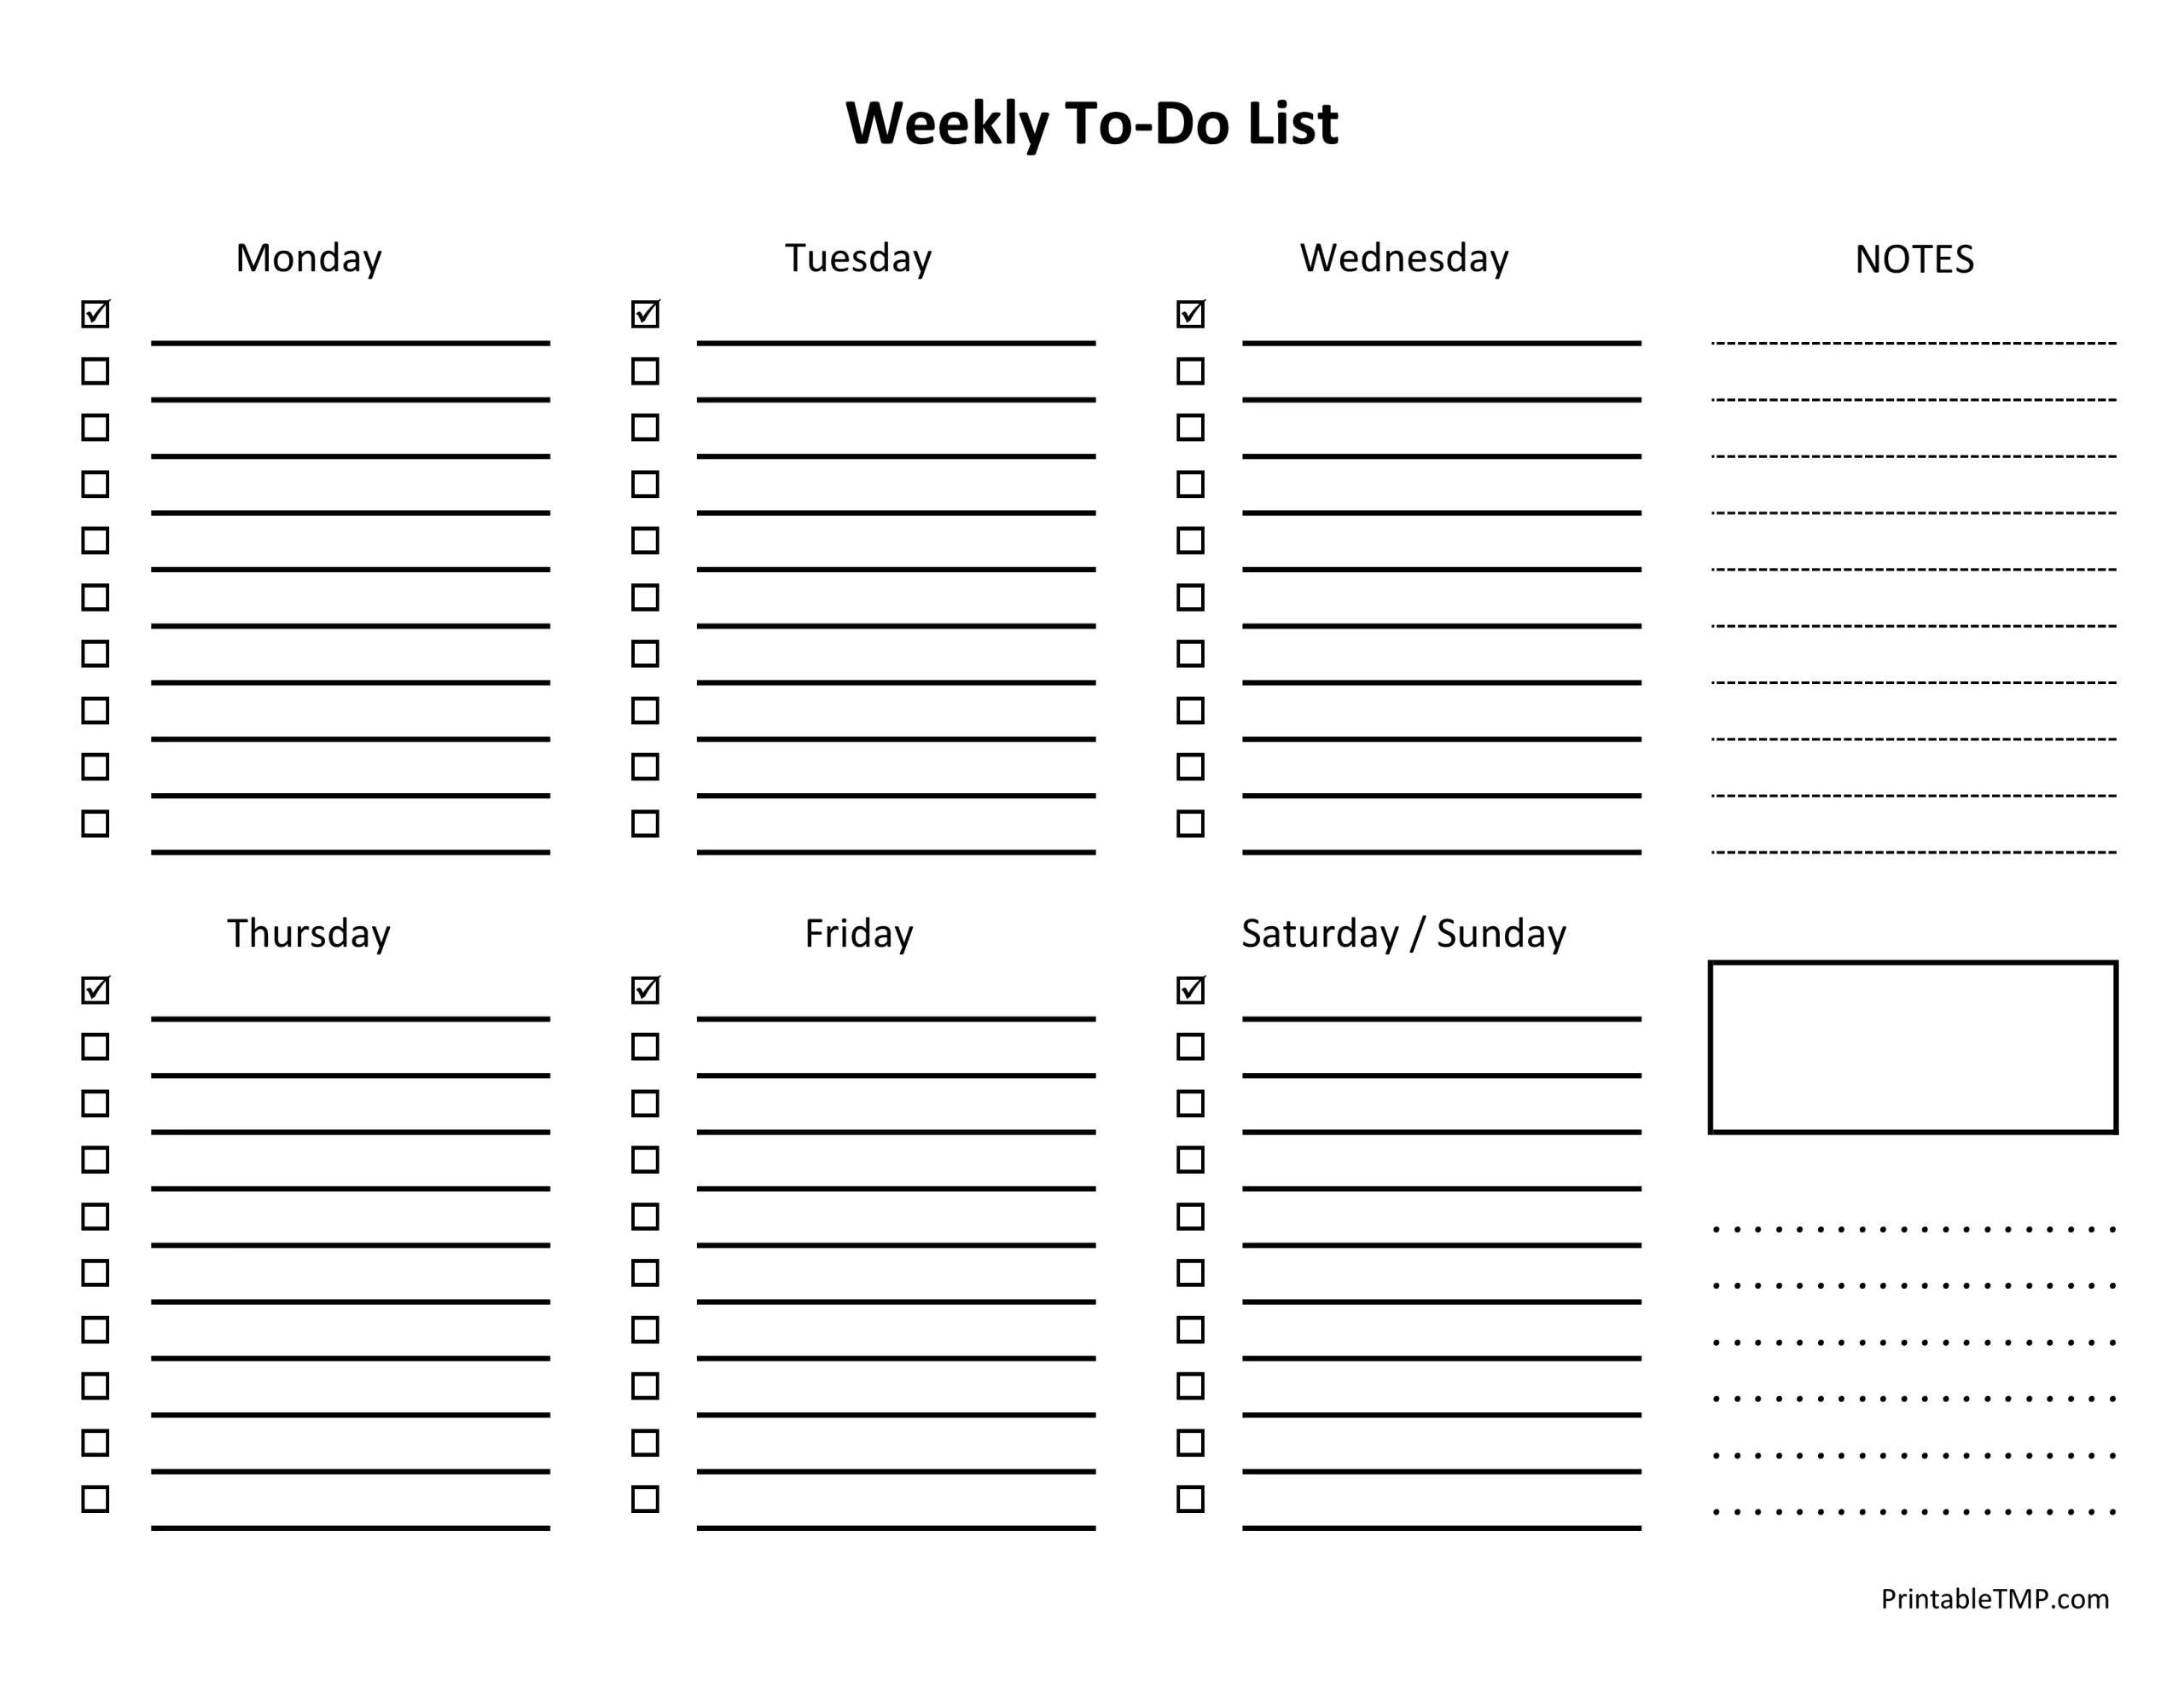 free-weekly-to-do-list-template-printable-daily-checklist